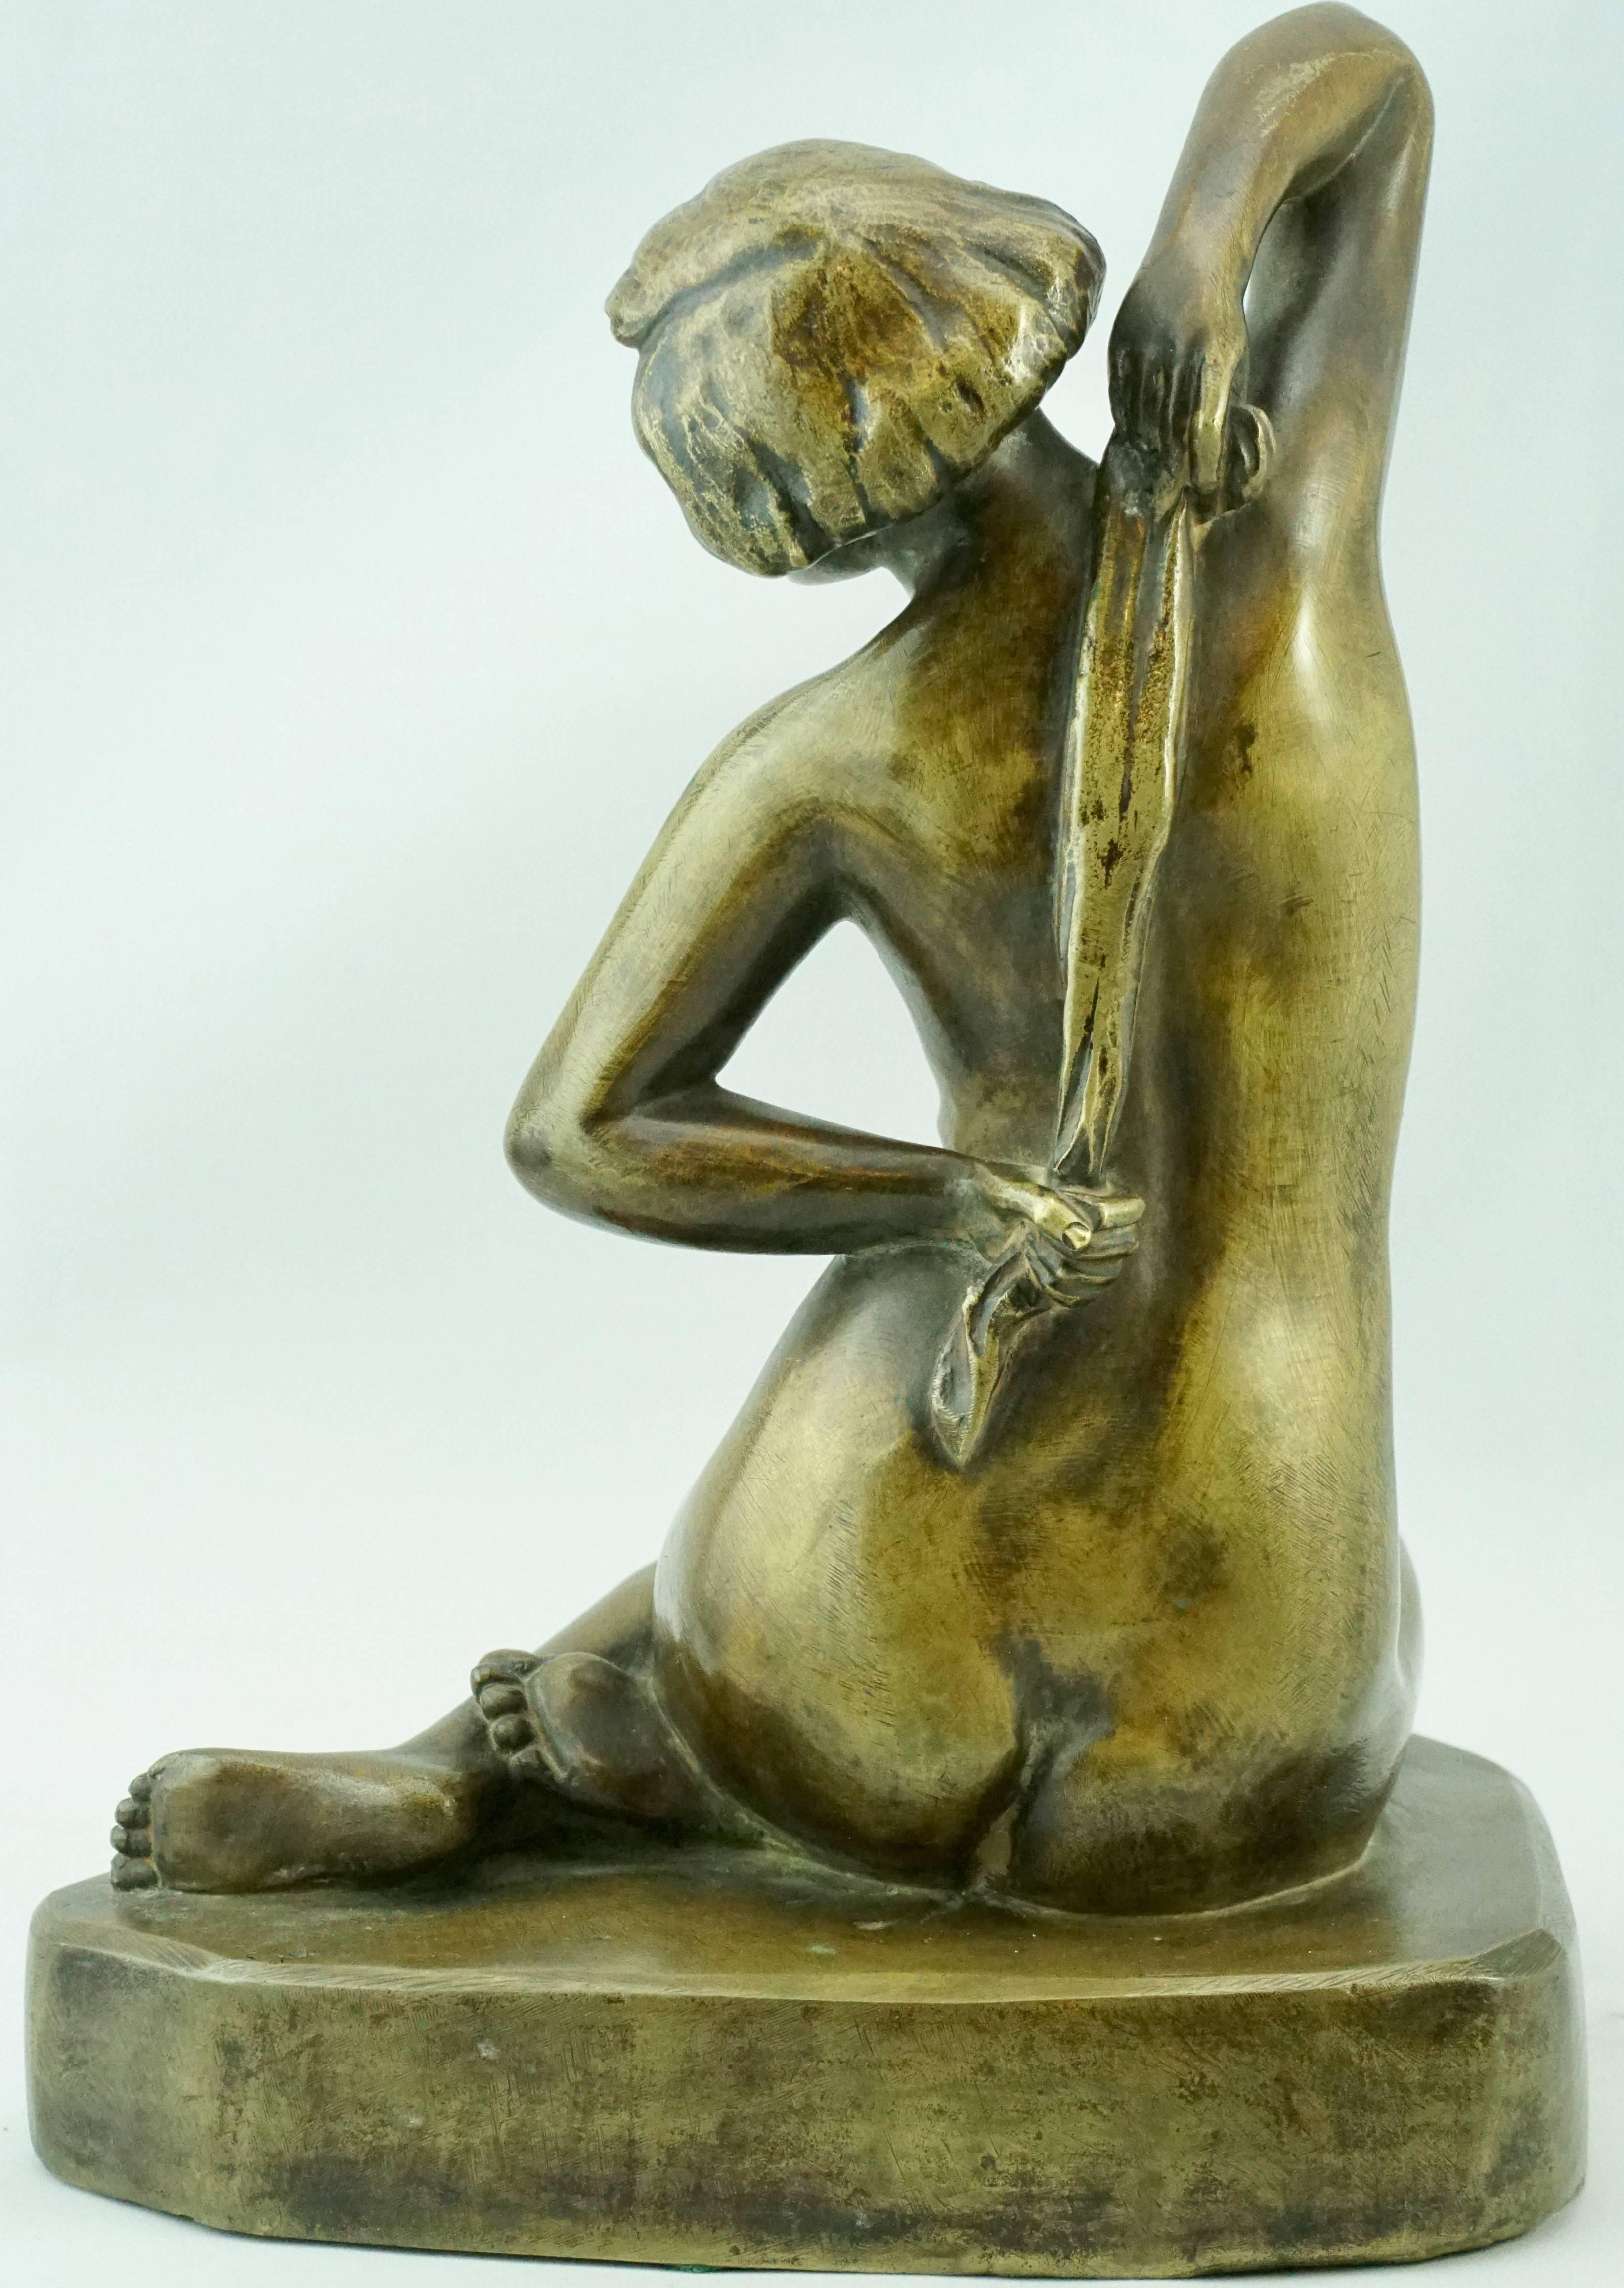 Charming French Art Deco Bronze Nude by F. Trinque, 1930 For Sale 2